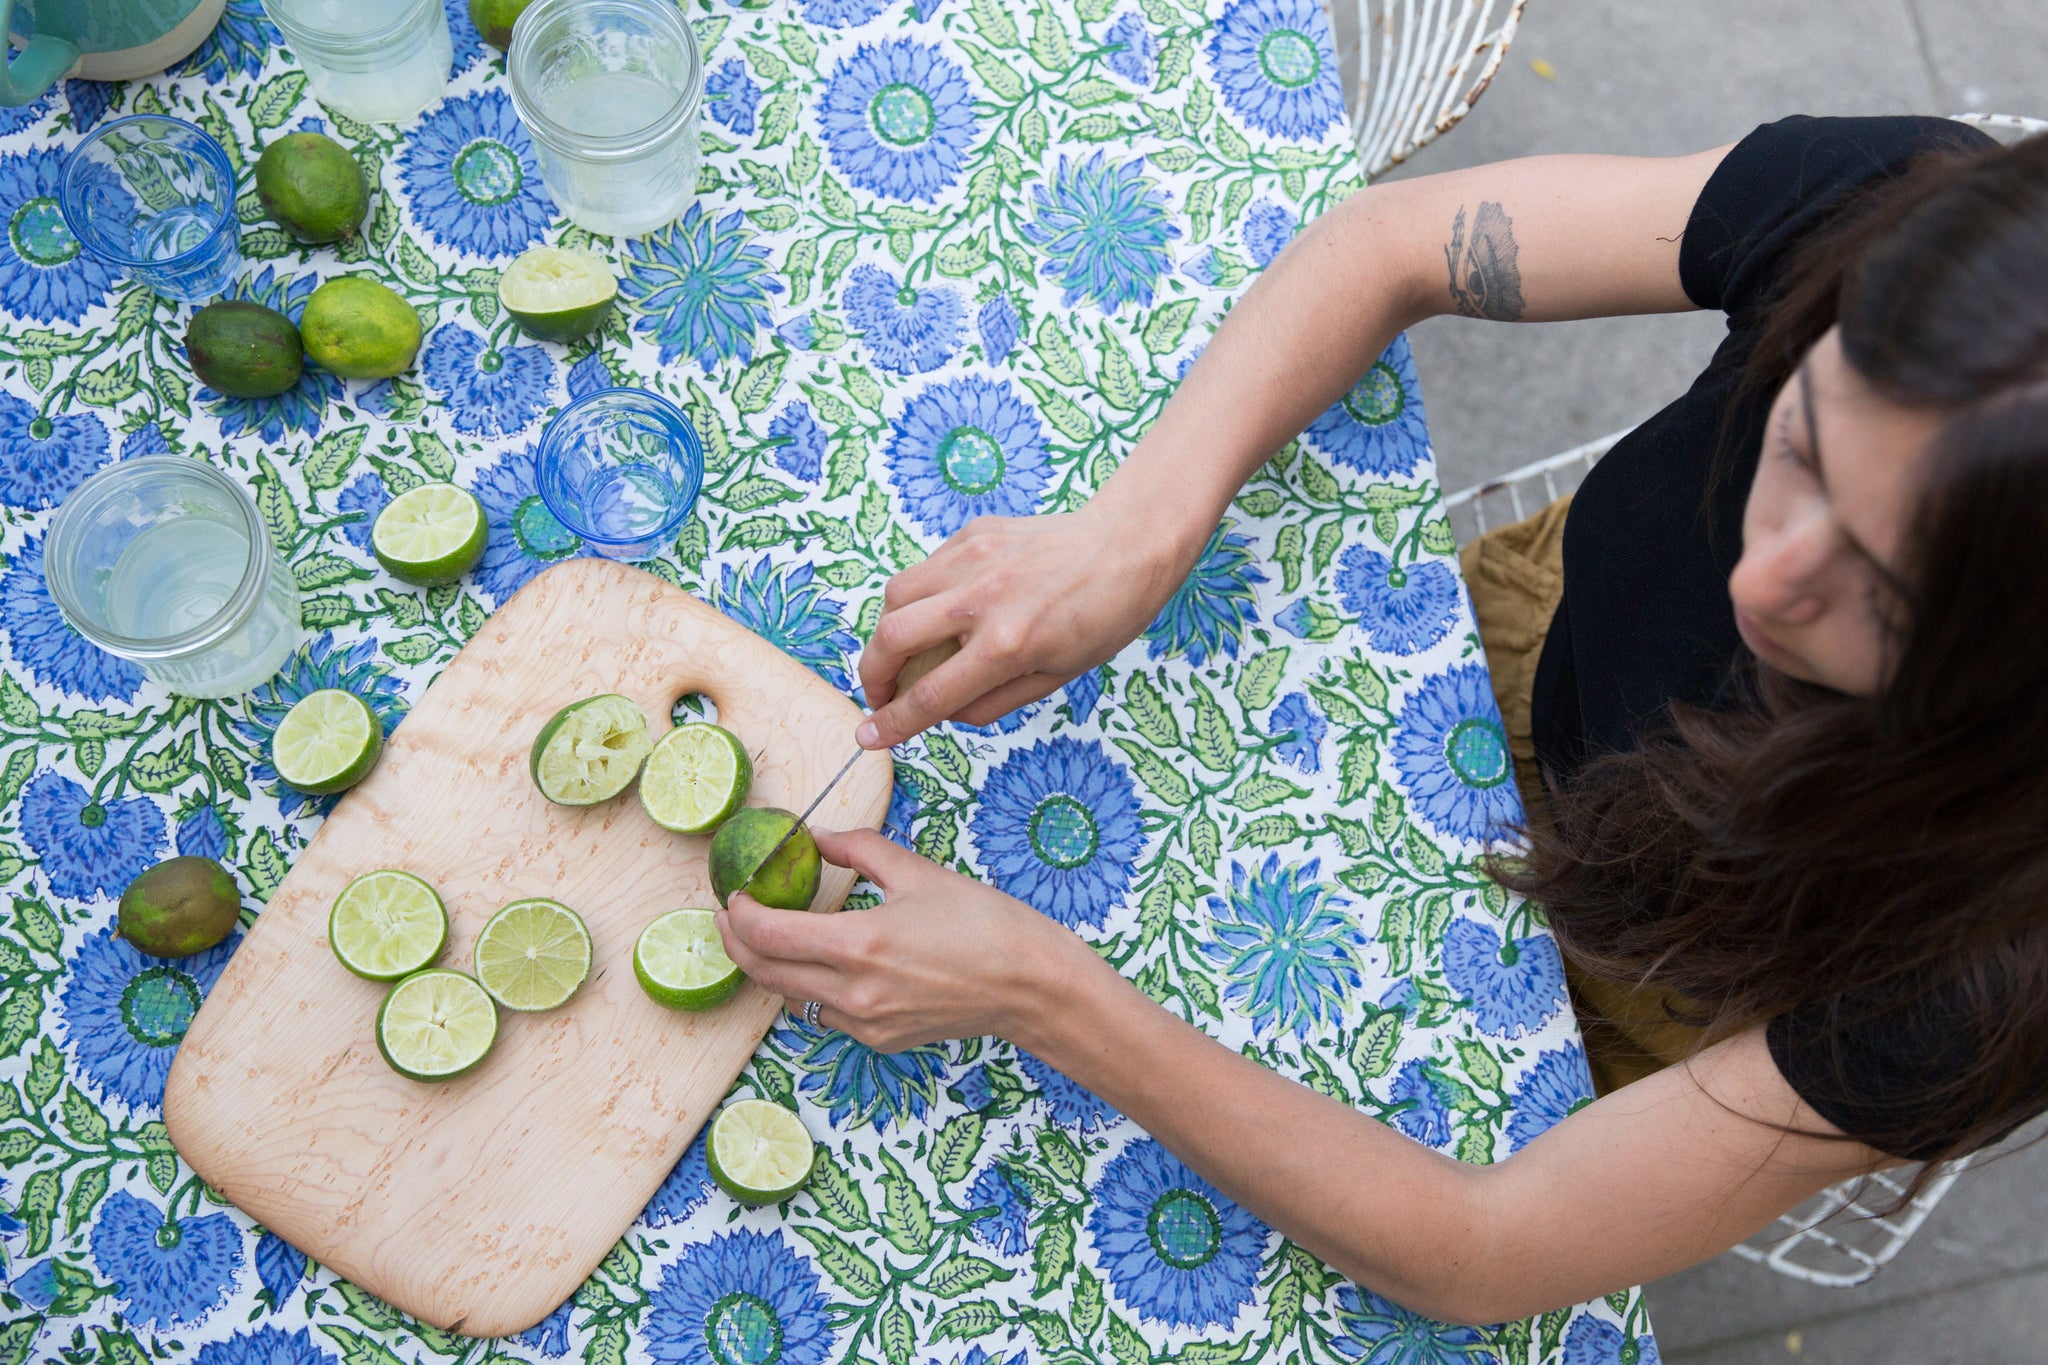 Dotter owner, Annika Huston, seated at outdoor table with blue and green tablecloth holding limes